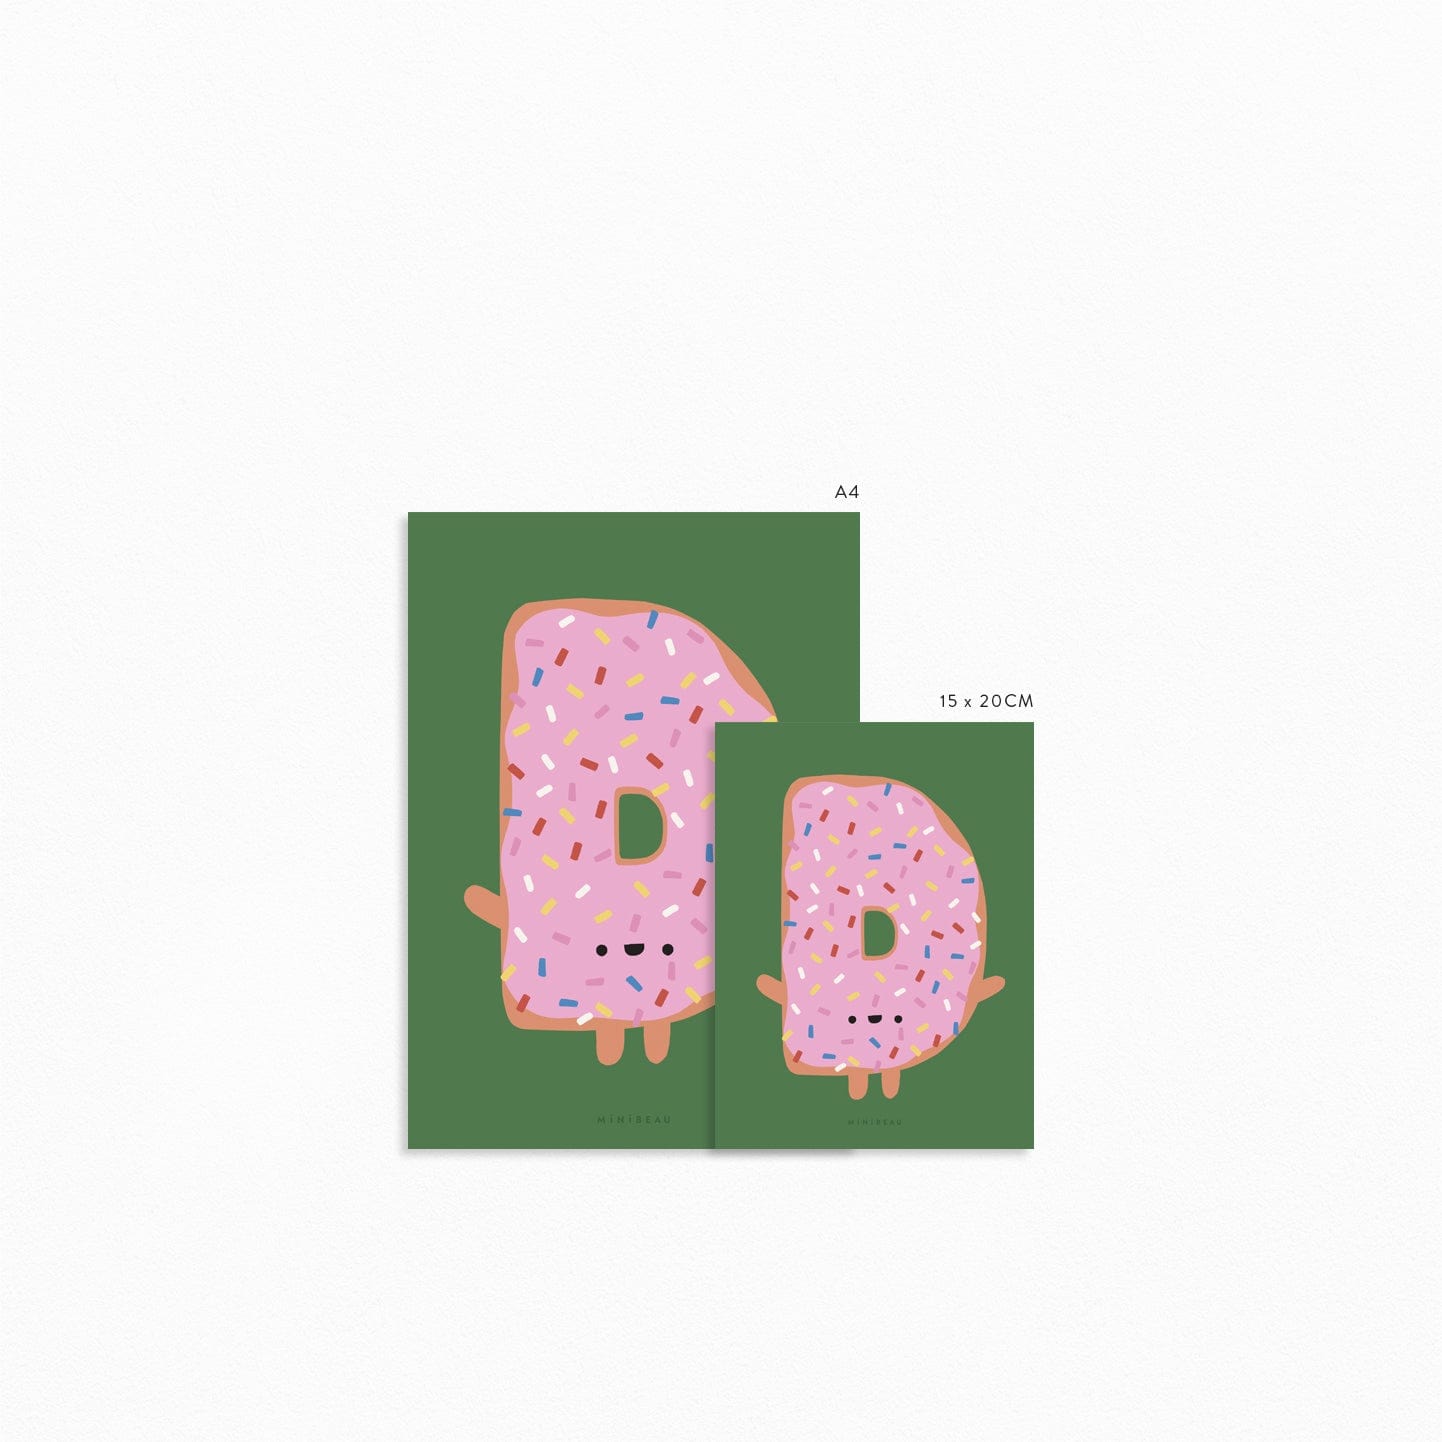 Image to show the sizes available in the Happy Alphabet 'd' art print. Our Happy Alphabet 'D' Art Print shows a doughnut smiling iced doughnut in the shape of a D with short arms and legs. Icing is pink with multicoloured sprinkles and the print background is green.